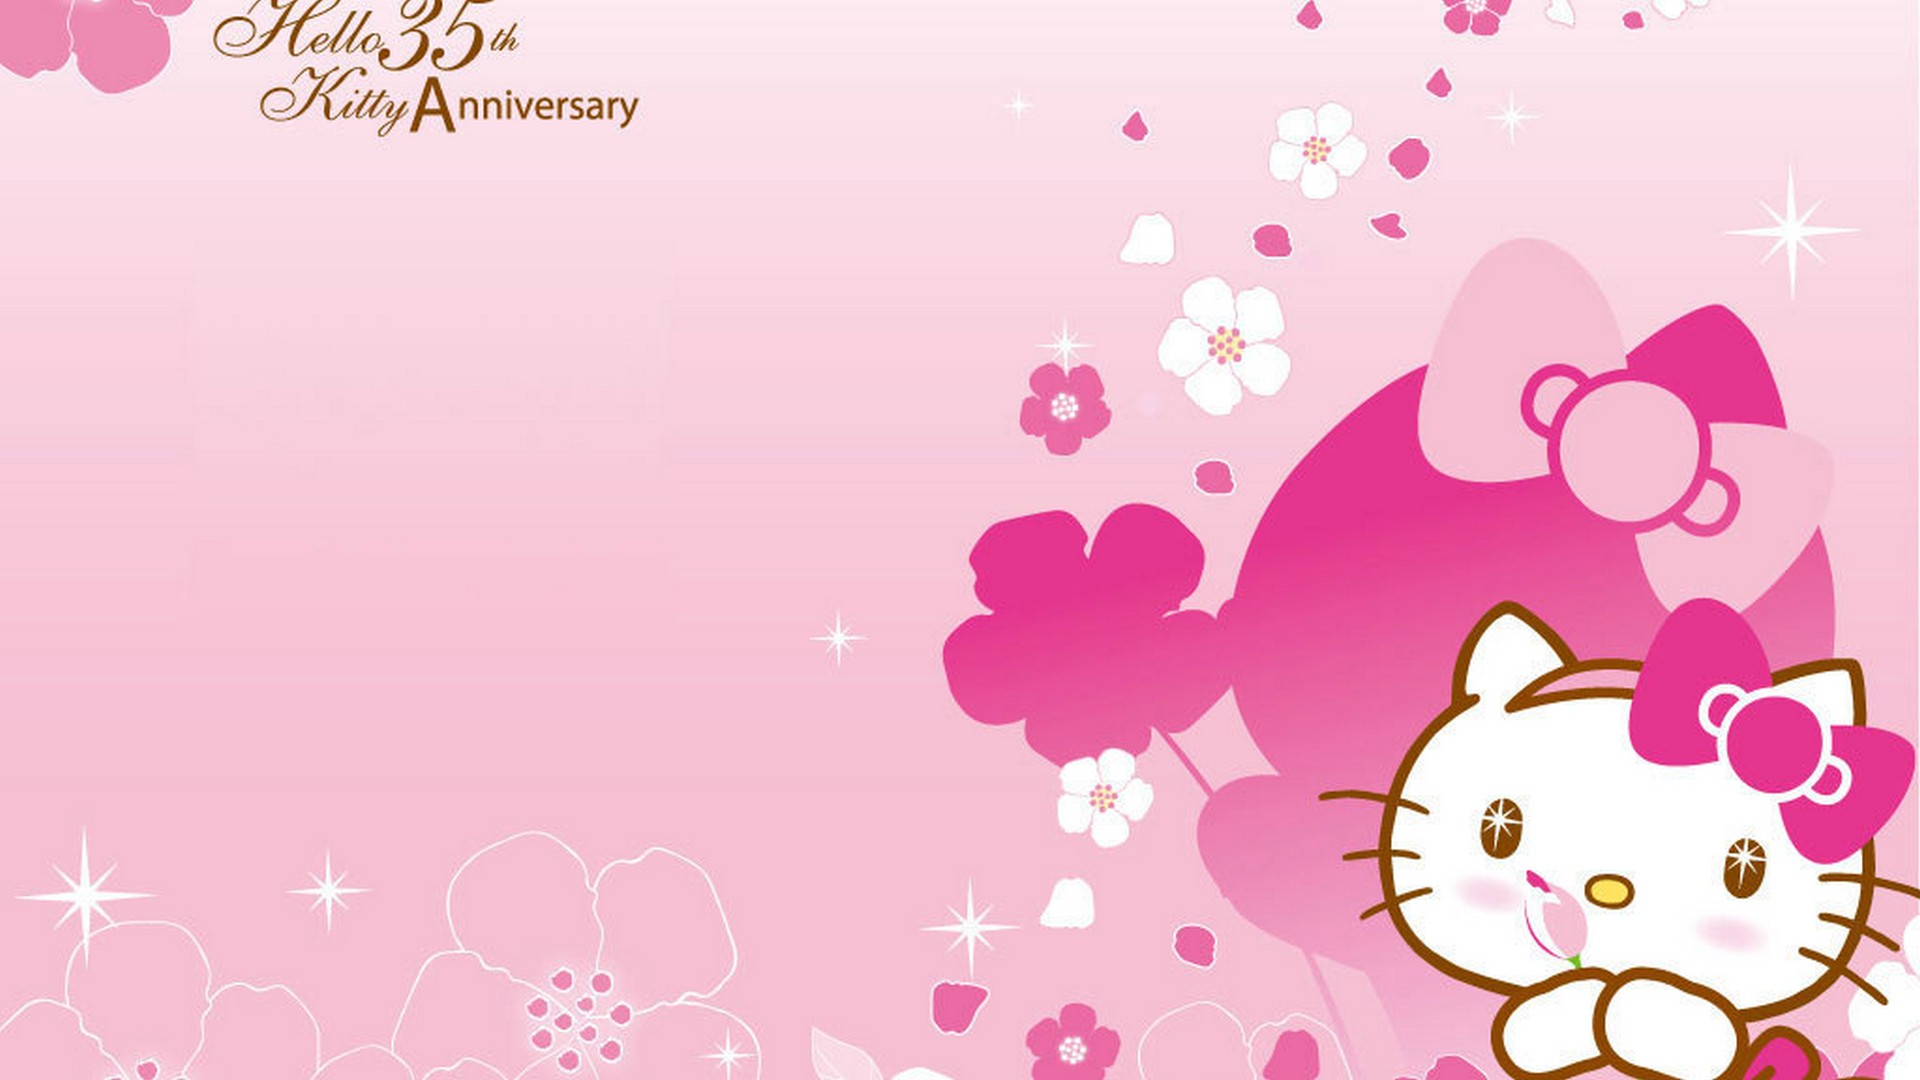 Hello Kitty Desktop Backgrounds HD with image resolution 1920x1080 pixel. You can use this wallpaper as background for your desktop Computer Screensavers, Android or iPhone smartphones